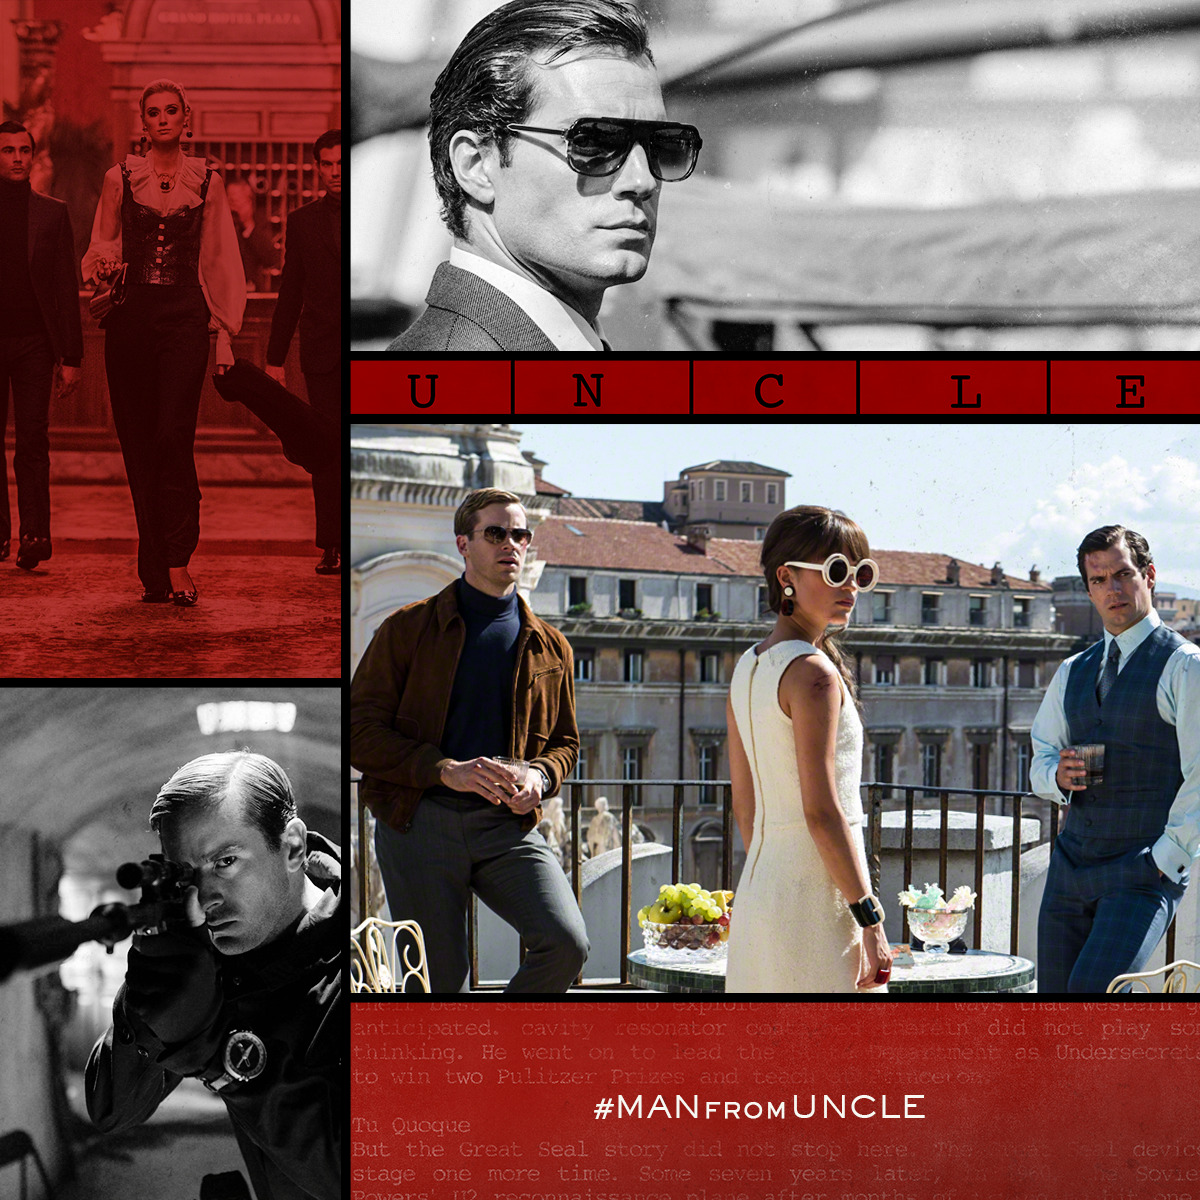 The Man from U.N.C.L.E. (dir. Guy Ritchie).
“[It’s] unabashedly fun and a wholly joyous viewing experience with all its nods to the ‘60s style of sexy spy films. It’s just enough parts James Bond, Ocean’s Eleven, and Mission: Impossible to satisfy...